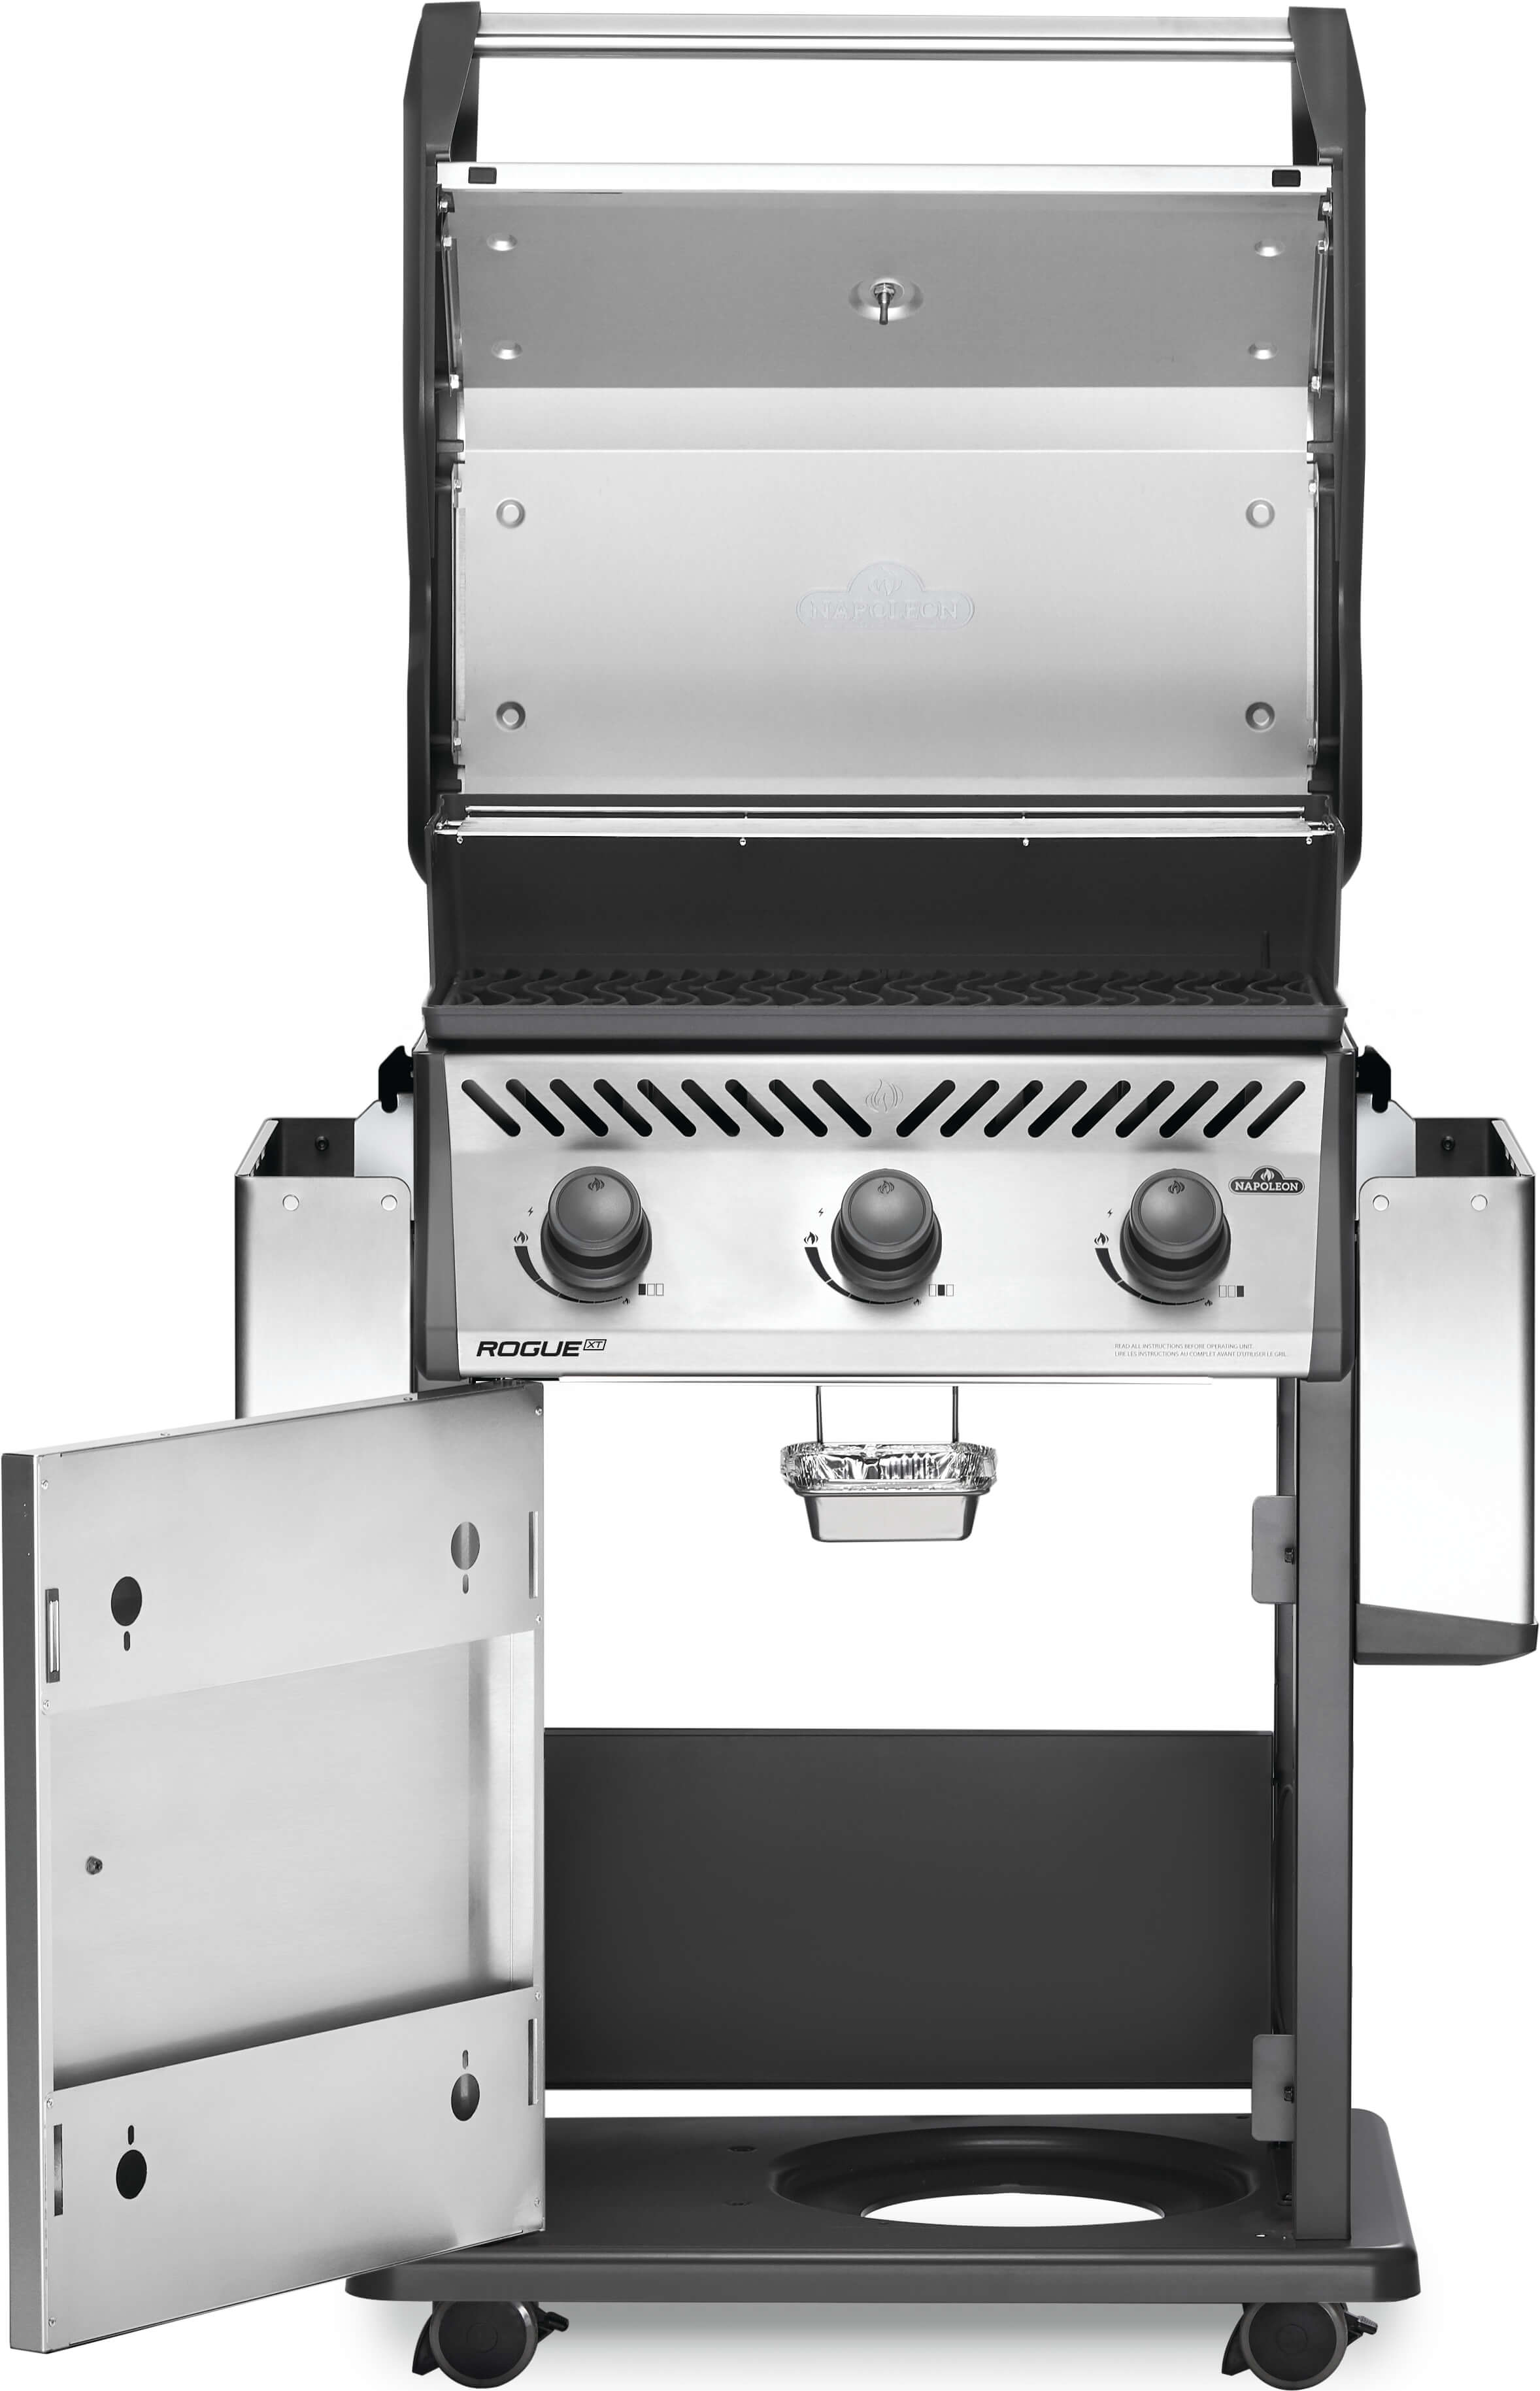 Napoleon Rogue XT 425 Propane Gas Grill, Stainless Steel - image 4 of 13